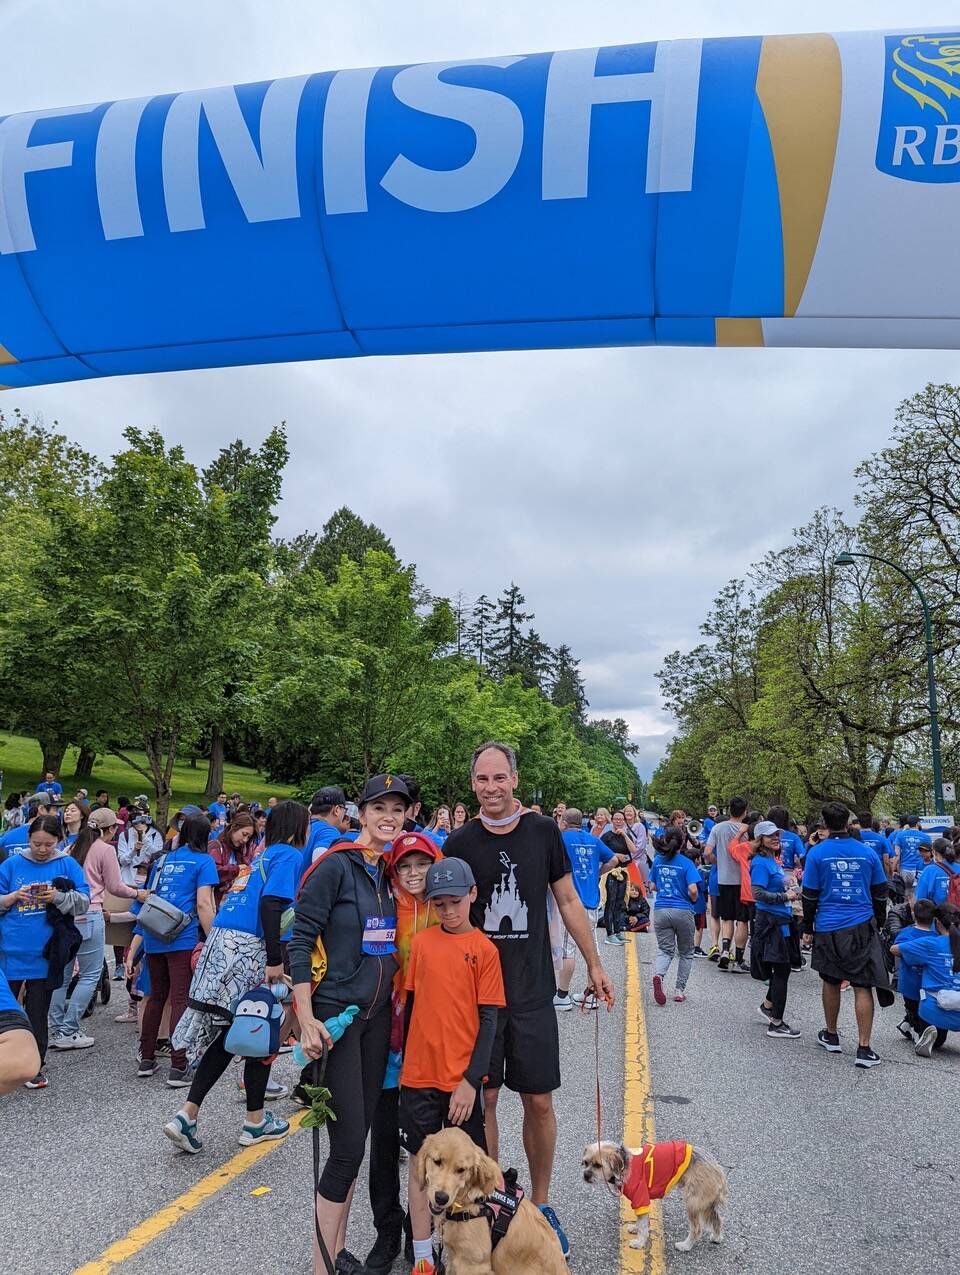 The Cannon family is taking part in the RBC Race for the Kids again this June after their eldest son's battle with cancer. As of September 2022, Nick is cancer free. (Submitted by Kelly Cannon)